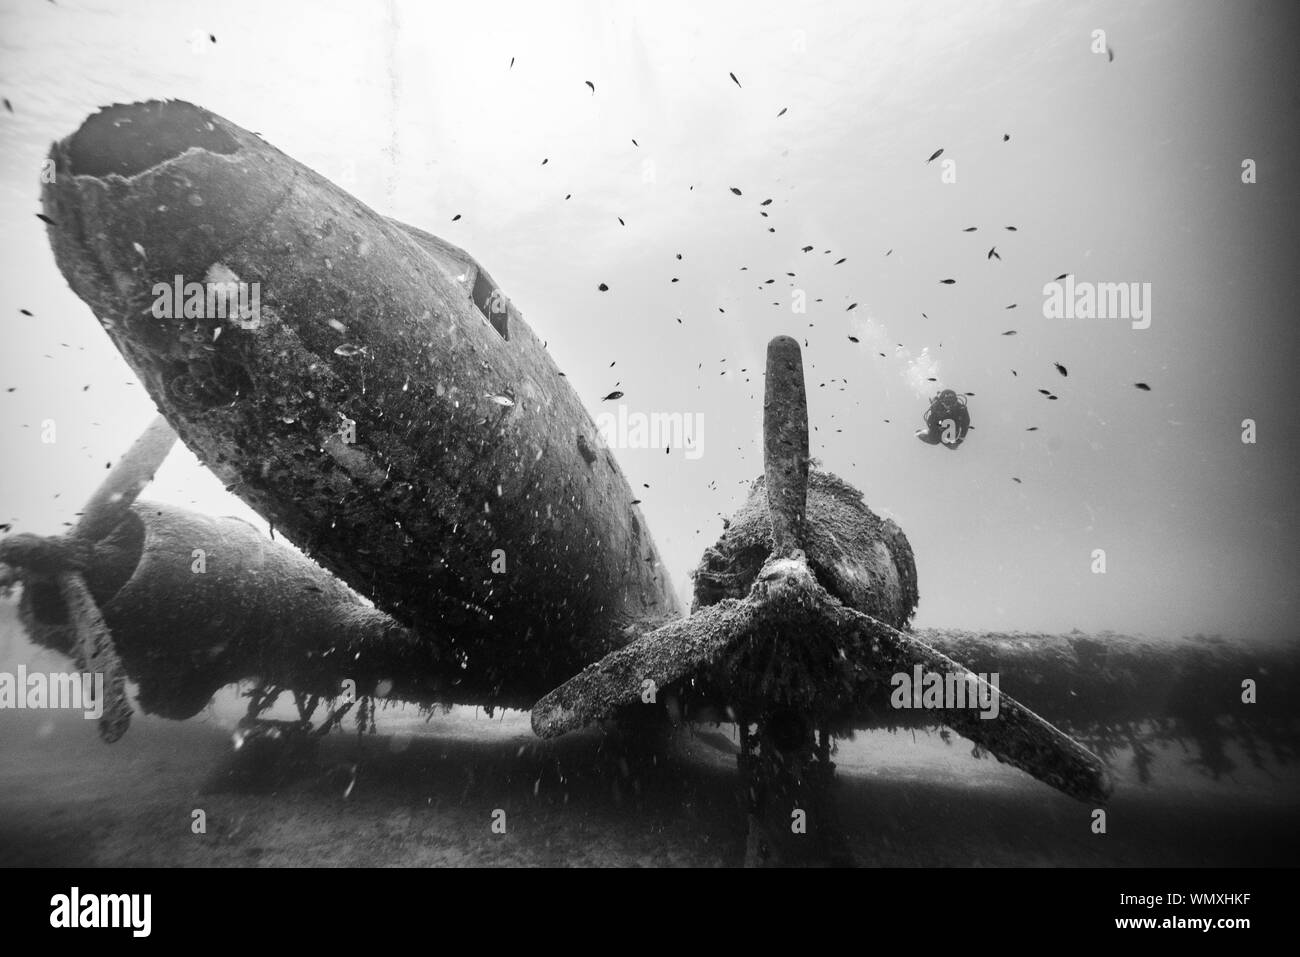 Low Angle View Of Scuba Diver Swimming Over Airplane Wreck Stock Photo